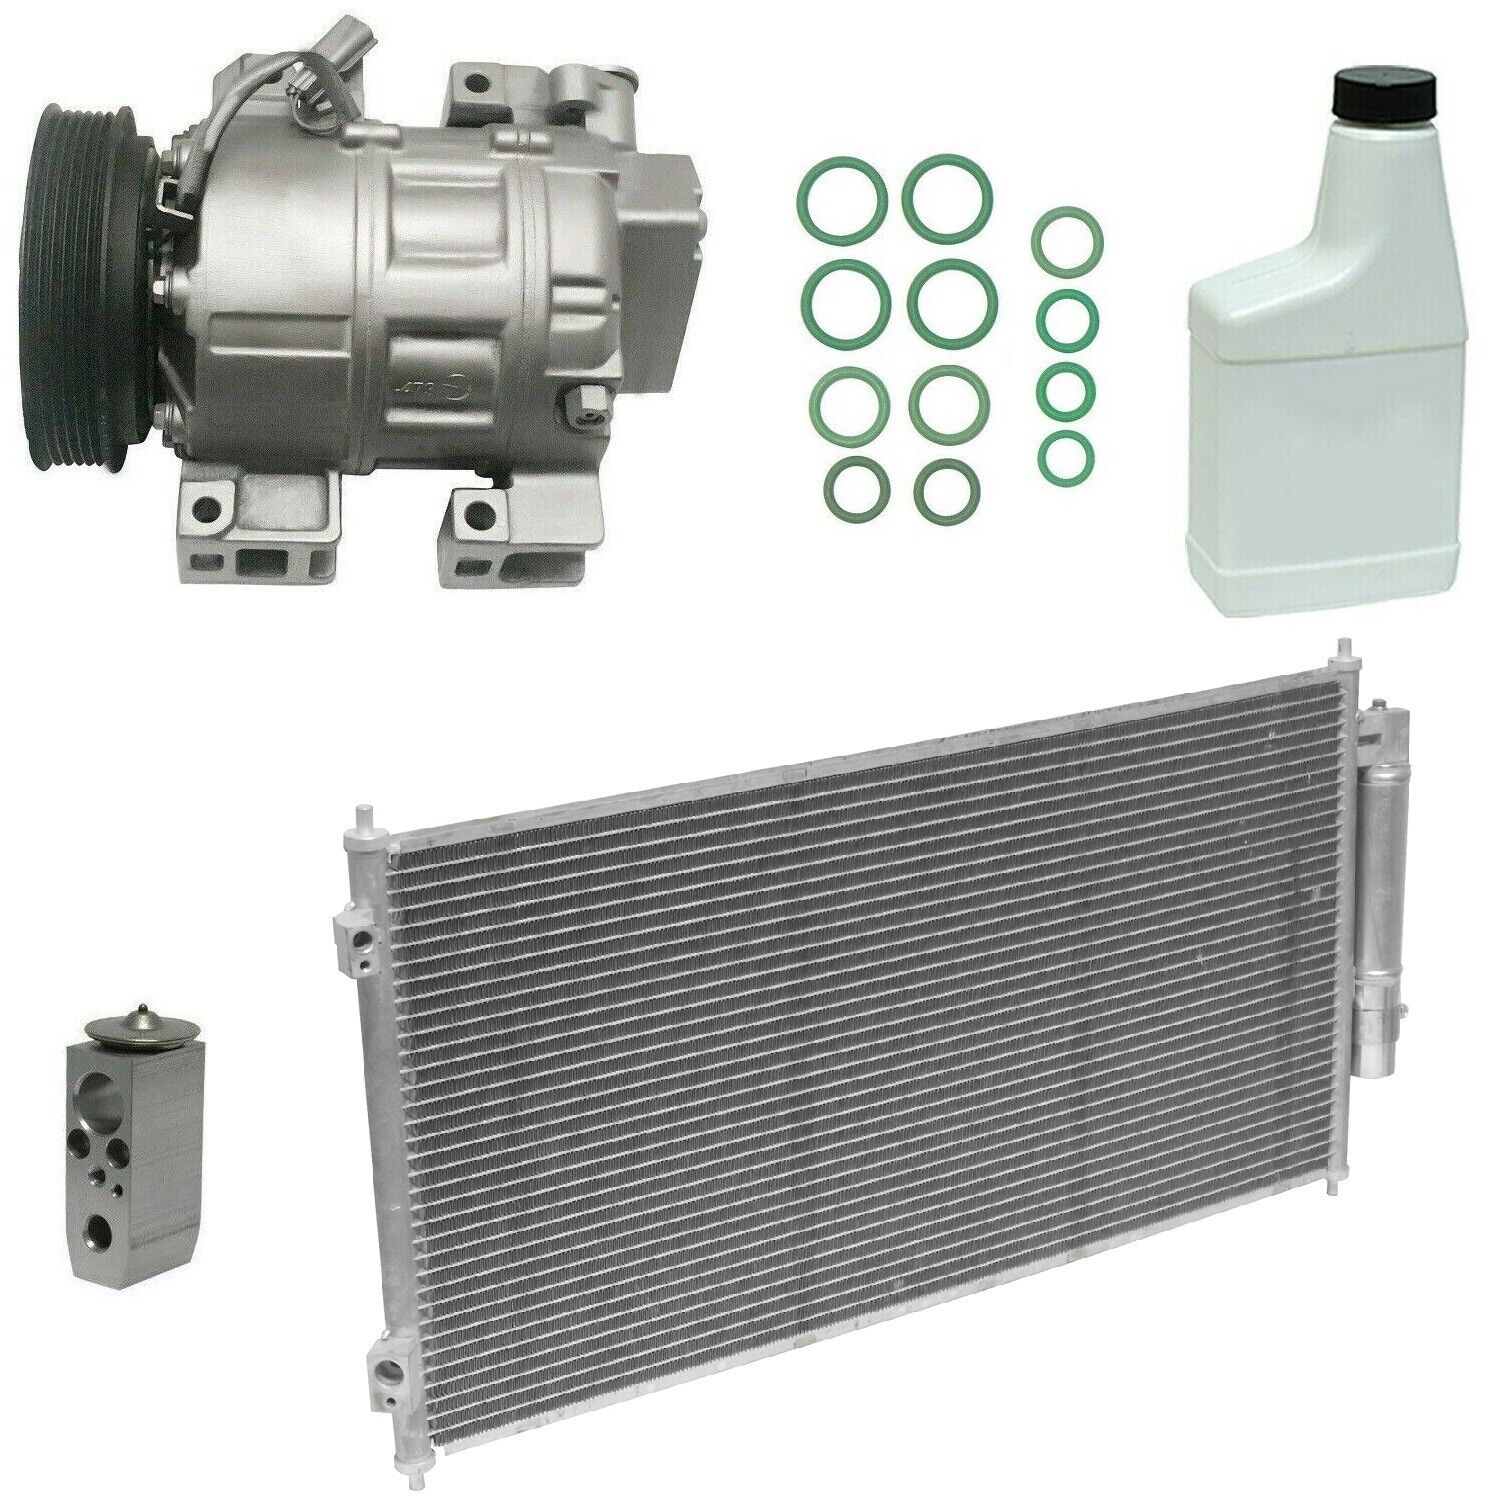 RYC Remanufactured Complete AC Compressor Kit AC56 (FG664) With Condenser